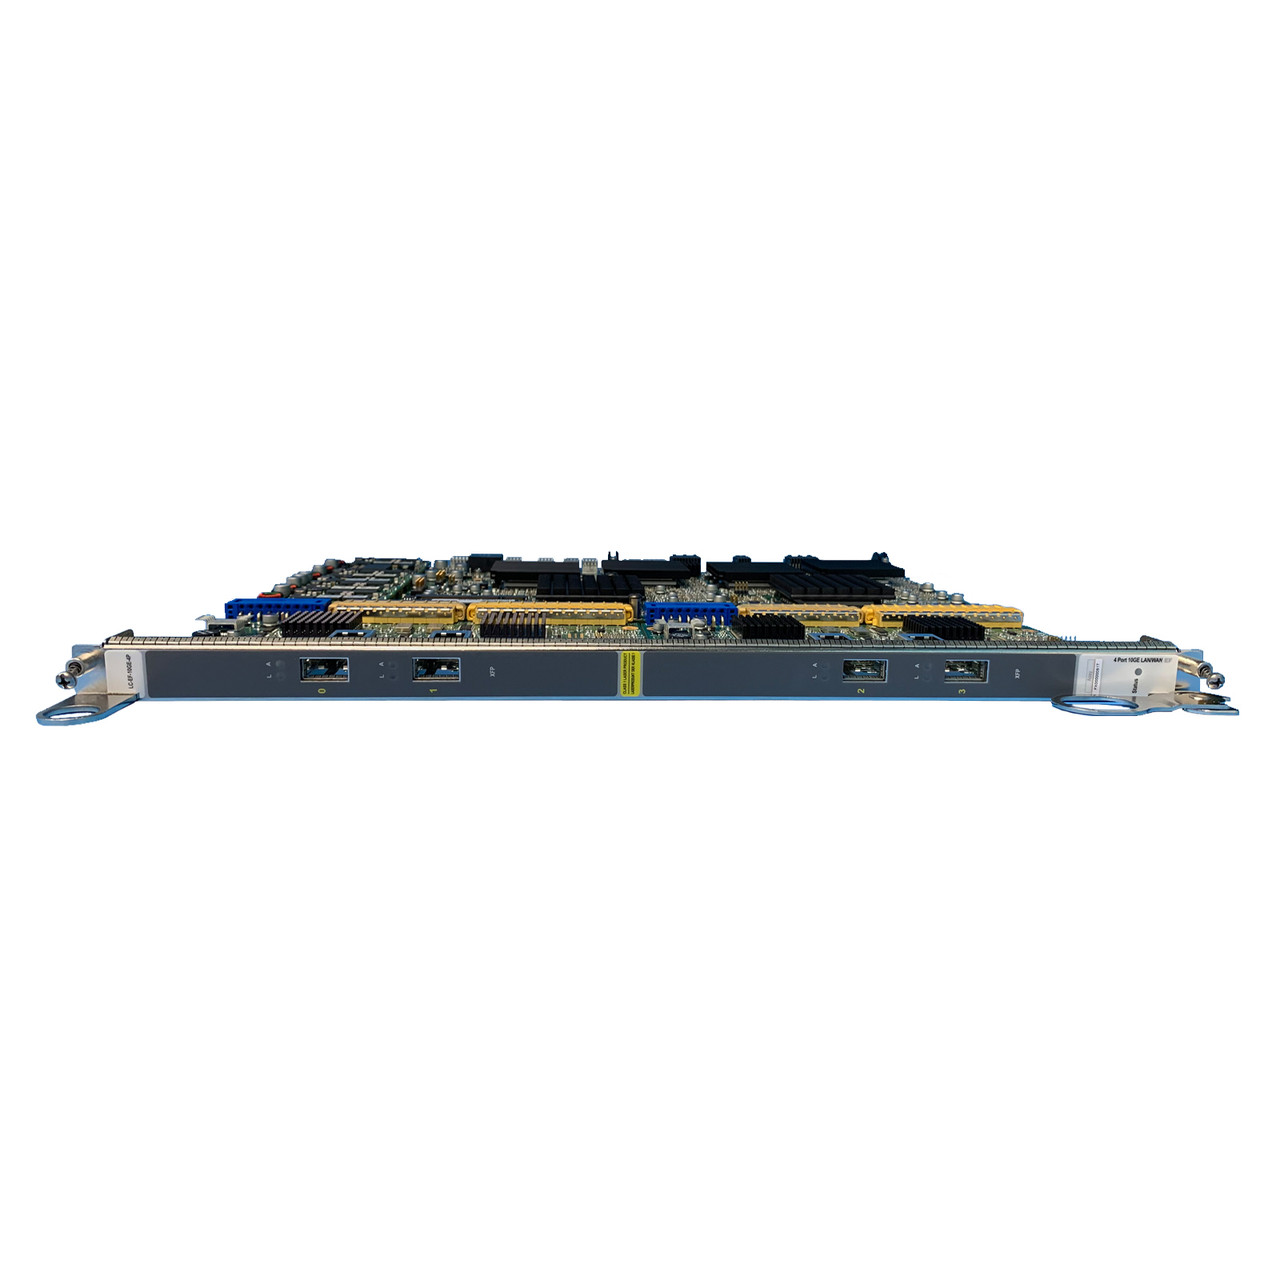 Dell 91YX0 Force 10 4 Port 10GE Module LC-EF-10GE-4P 754-00099-00 752-00374-03